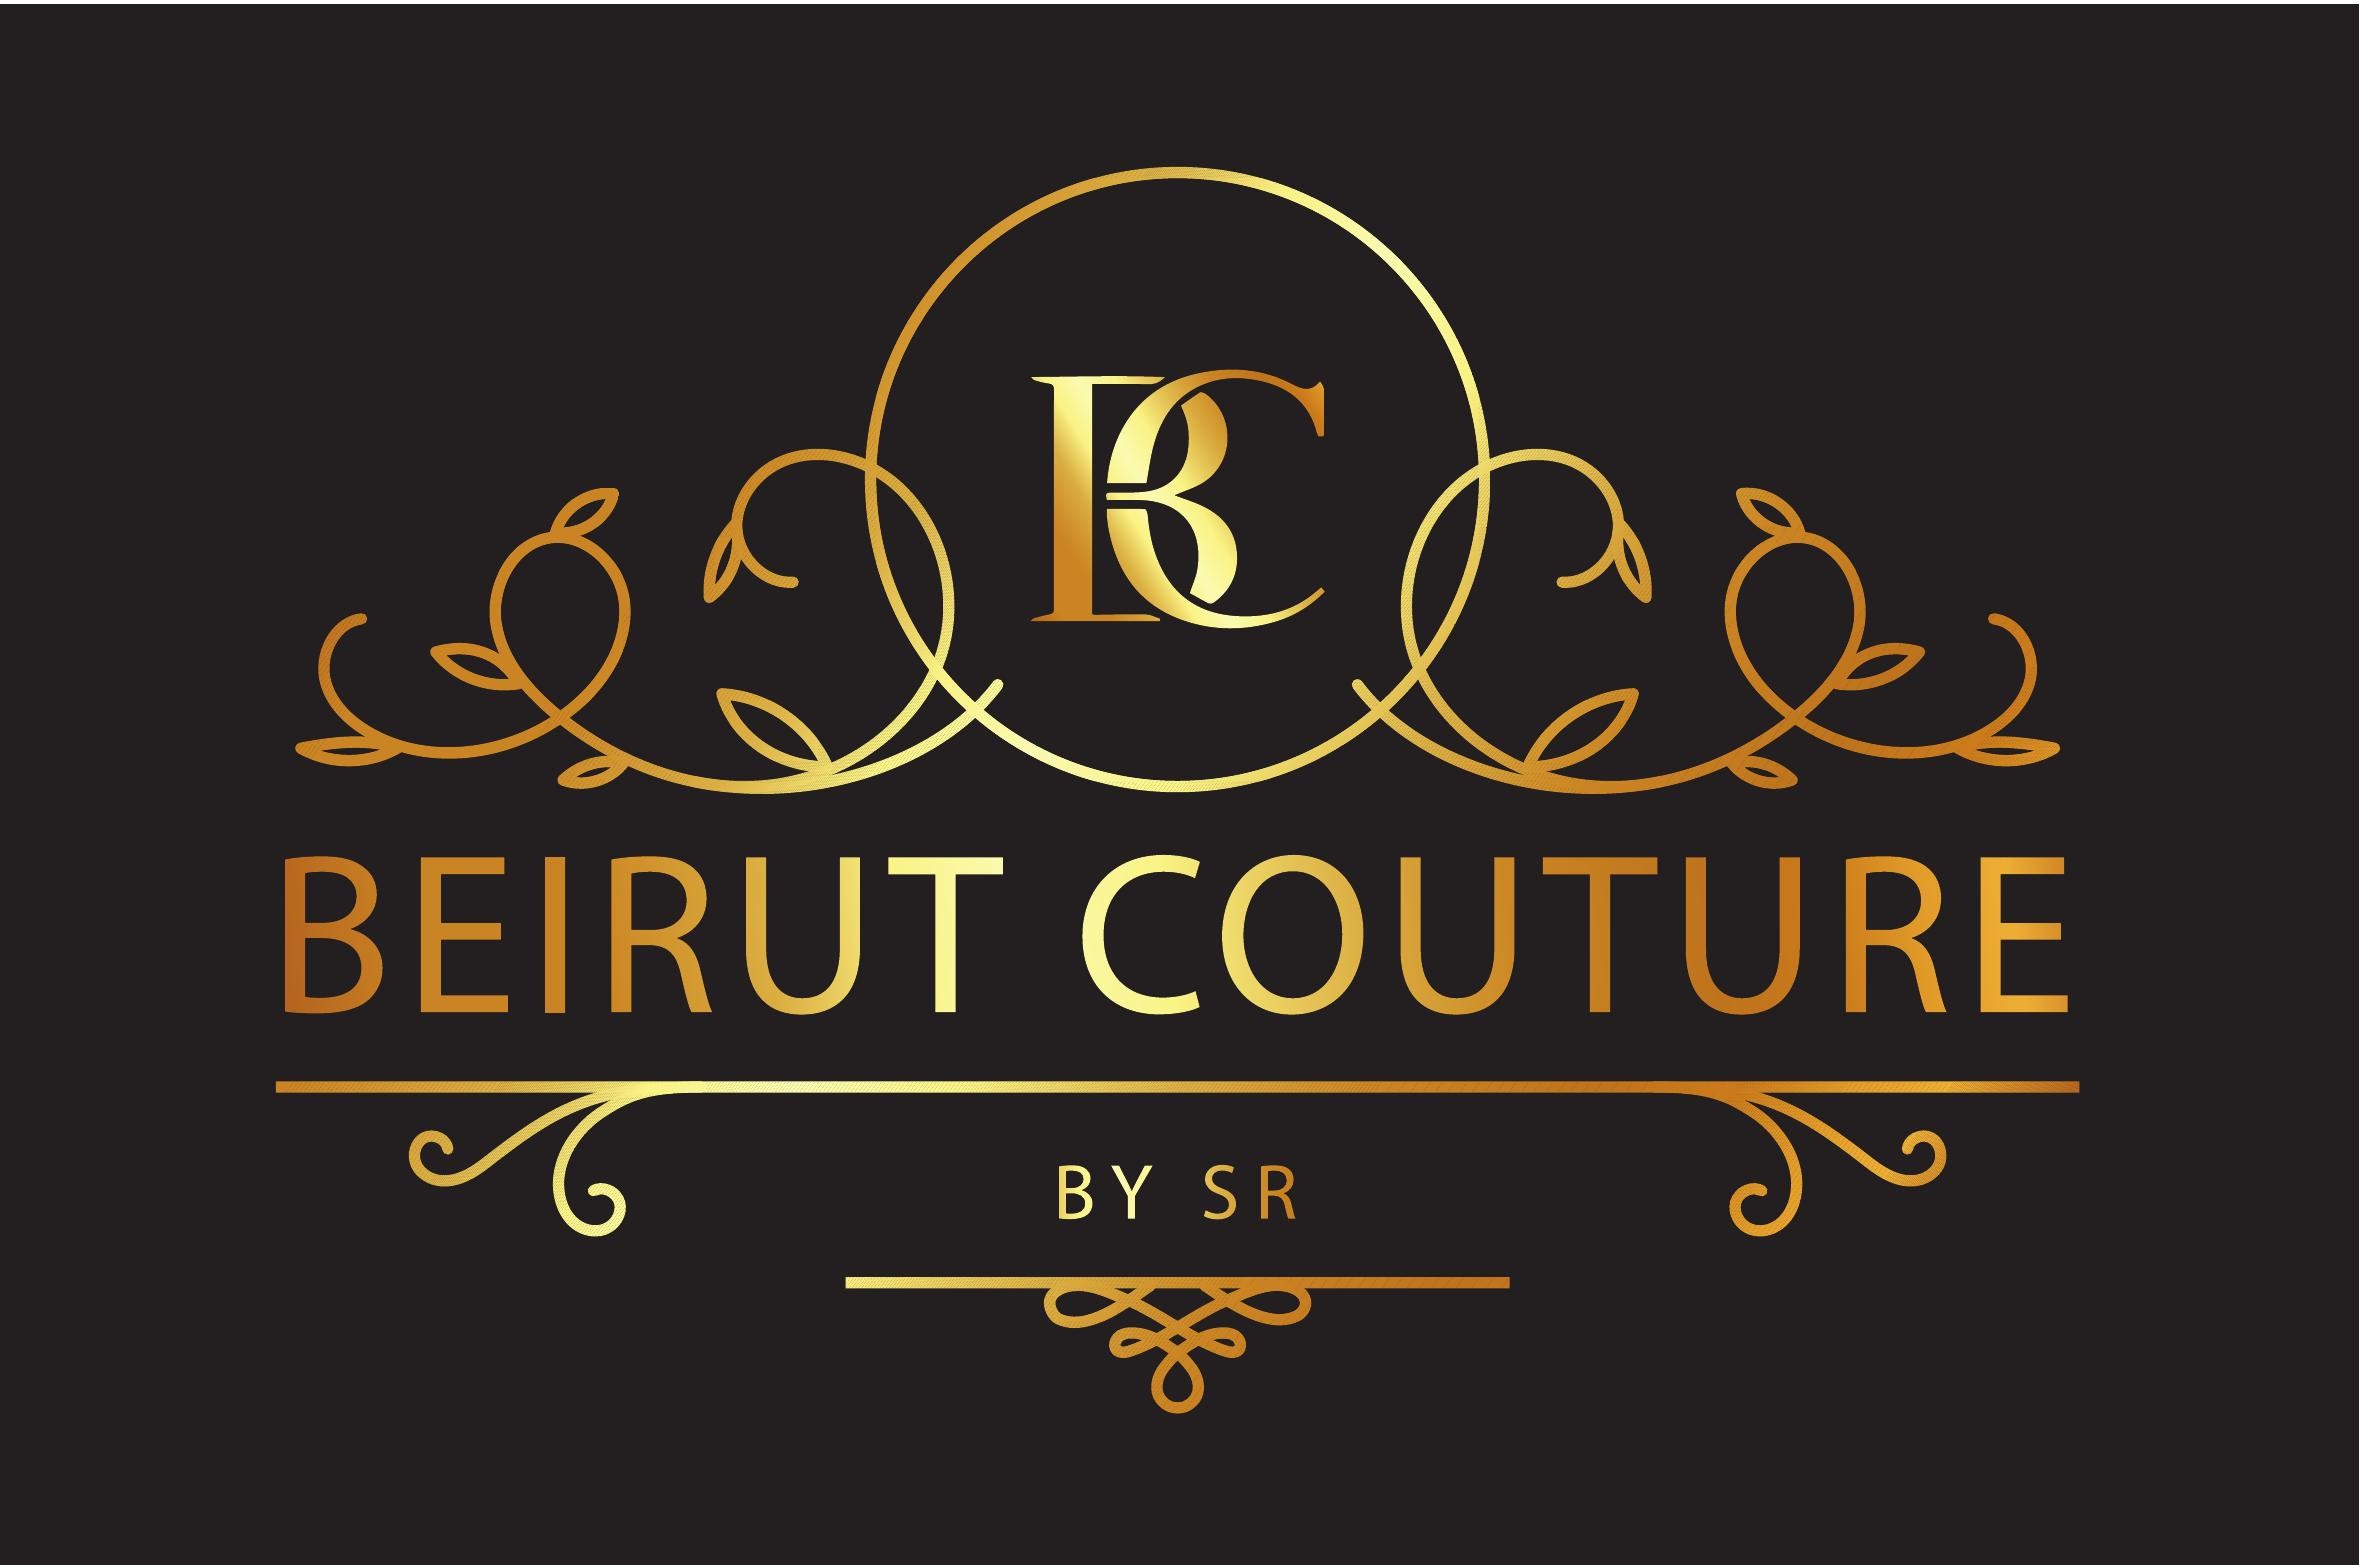 Beirut Couture